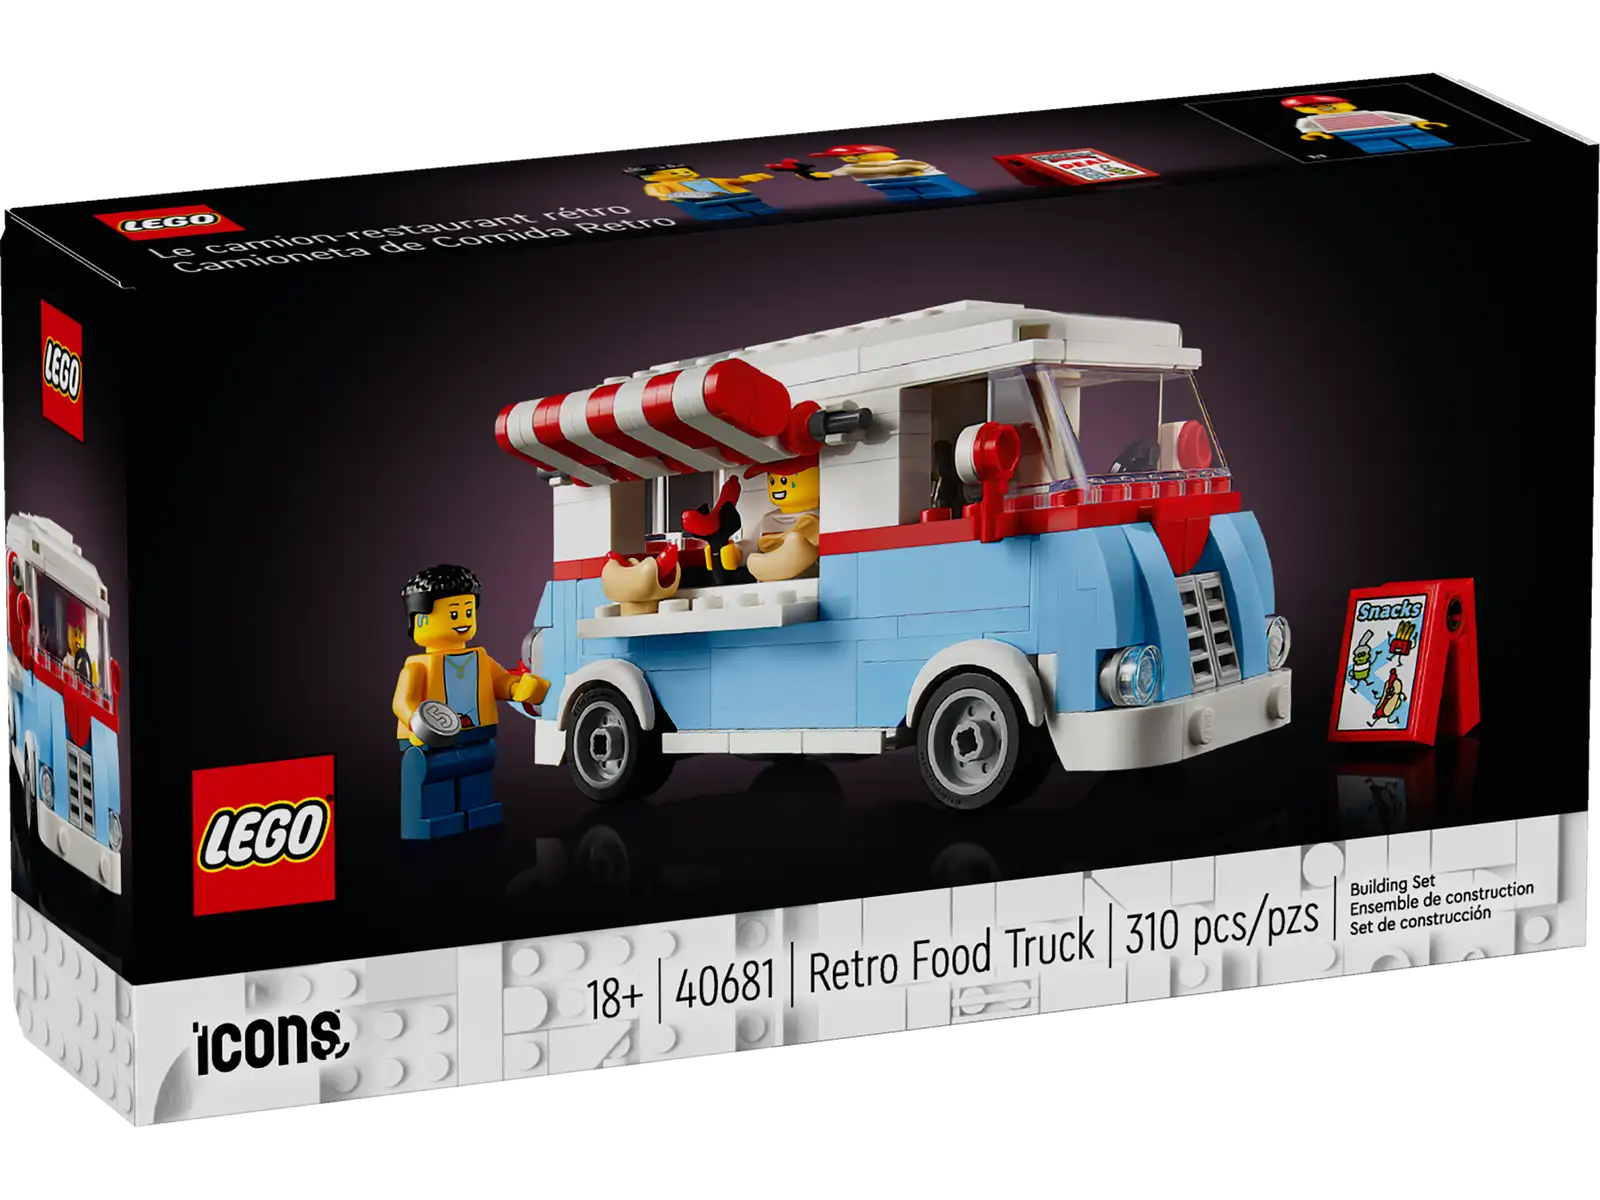 Enjoy a creative project with the LEGO® Icons Retro Food Truck (40681) building set for adults. Take time out to construct this displayable, mid-century fast-food truck, packed with cool details including a food prep area with a cooktop and soda machine. The set also includes vendor and customer minifigures and various accessories including fries, condiments and a hot dog. Open the striped awning, fold down the condiment tray, unload the menu board and you’re ready for business. Fun building set for adults – Enjoy quality time with this LEGO® Icons Retro Food Truck, complete with a detailed food prep area that includes a cooktop and soda machine What’s in the box – All you need to build a mid-century fast-food truck with an awning, menu board, fold-down condiment tray, 2 minifigures and food accessories including fries and a hot dog Features and Functions – Open the awning, fold down the condiment tray, fold out the menu board and remove the roof to access the truck’s detailed interior Build and display – Experience the joy of a rewarding solo building project or build the LEGO® Icons Retro Food Truck together with family or friends before displaying it for all to enjoy A LEGO® gift idea for adults – Give this Retro Food Truck construction set as a birthday, holiday or any-day gift for fans of iconic vehicles and LEGO building The food truck in this 309-piece building set measures over 2.5 in. (7 cm) high, 5 in. (13 cm) long and 2.5 in. (6 cm) wide